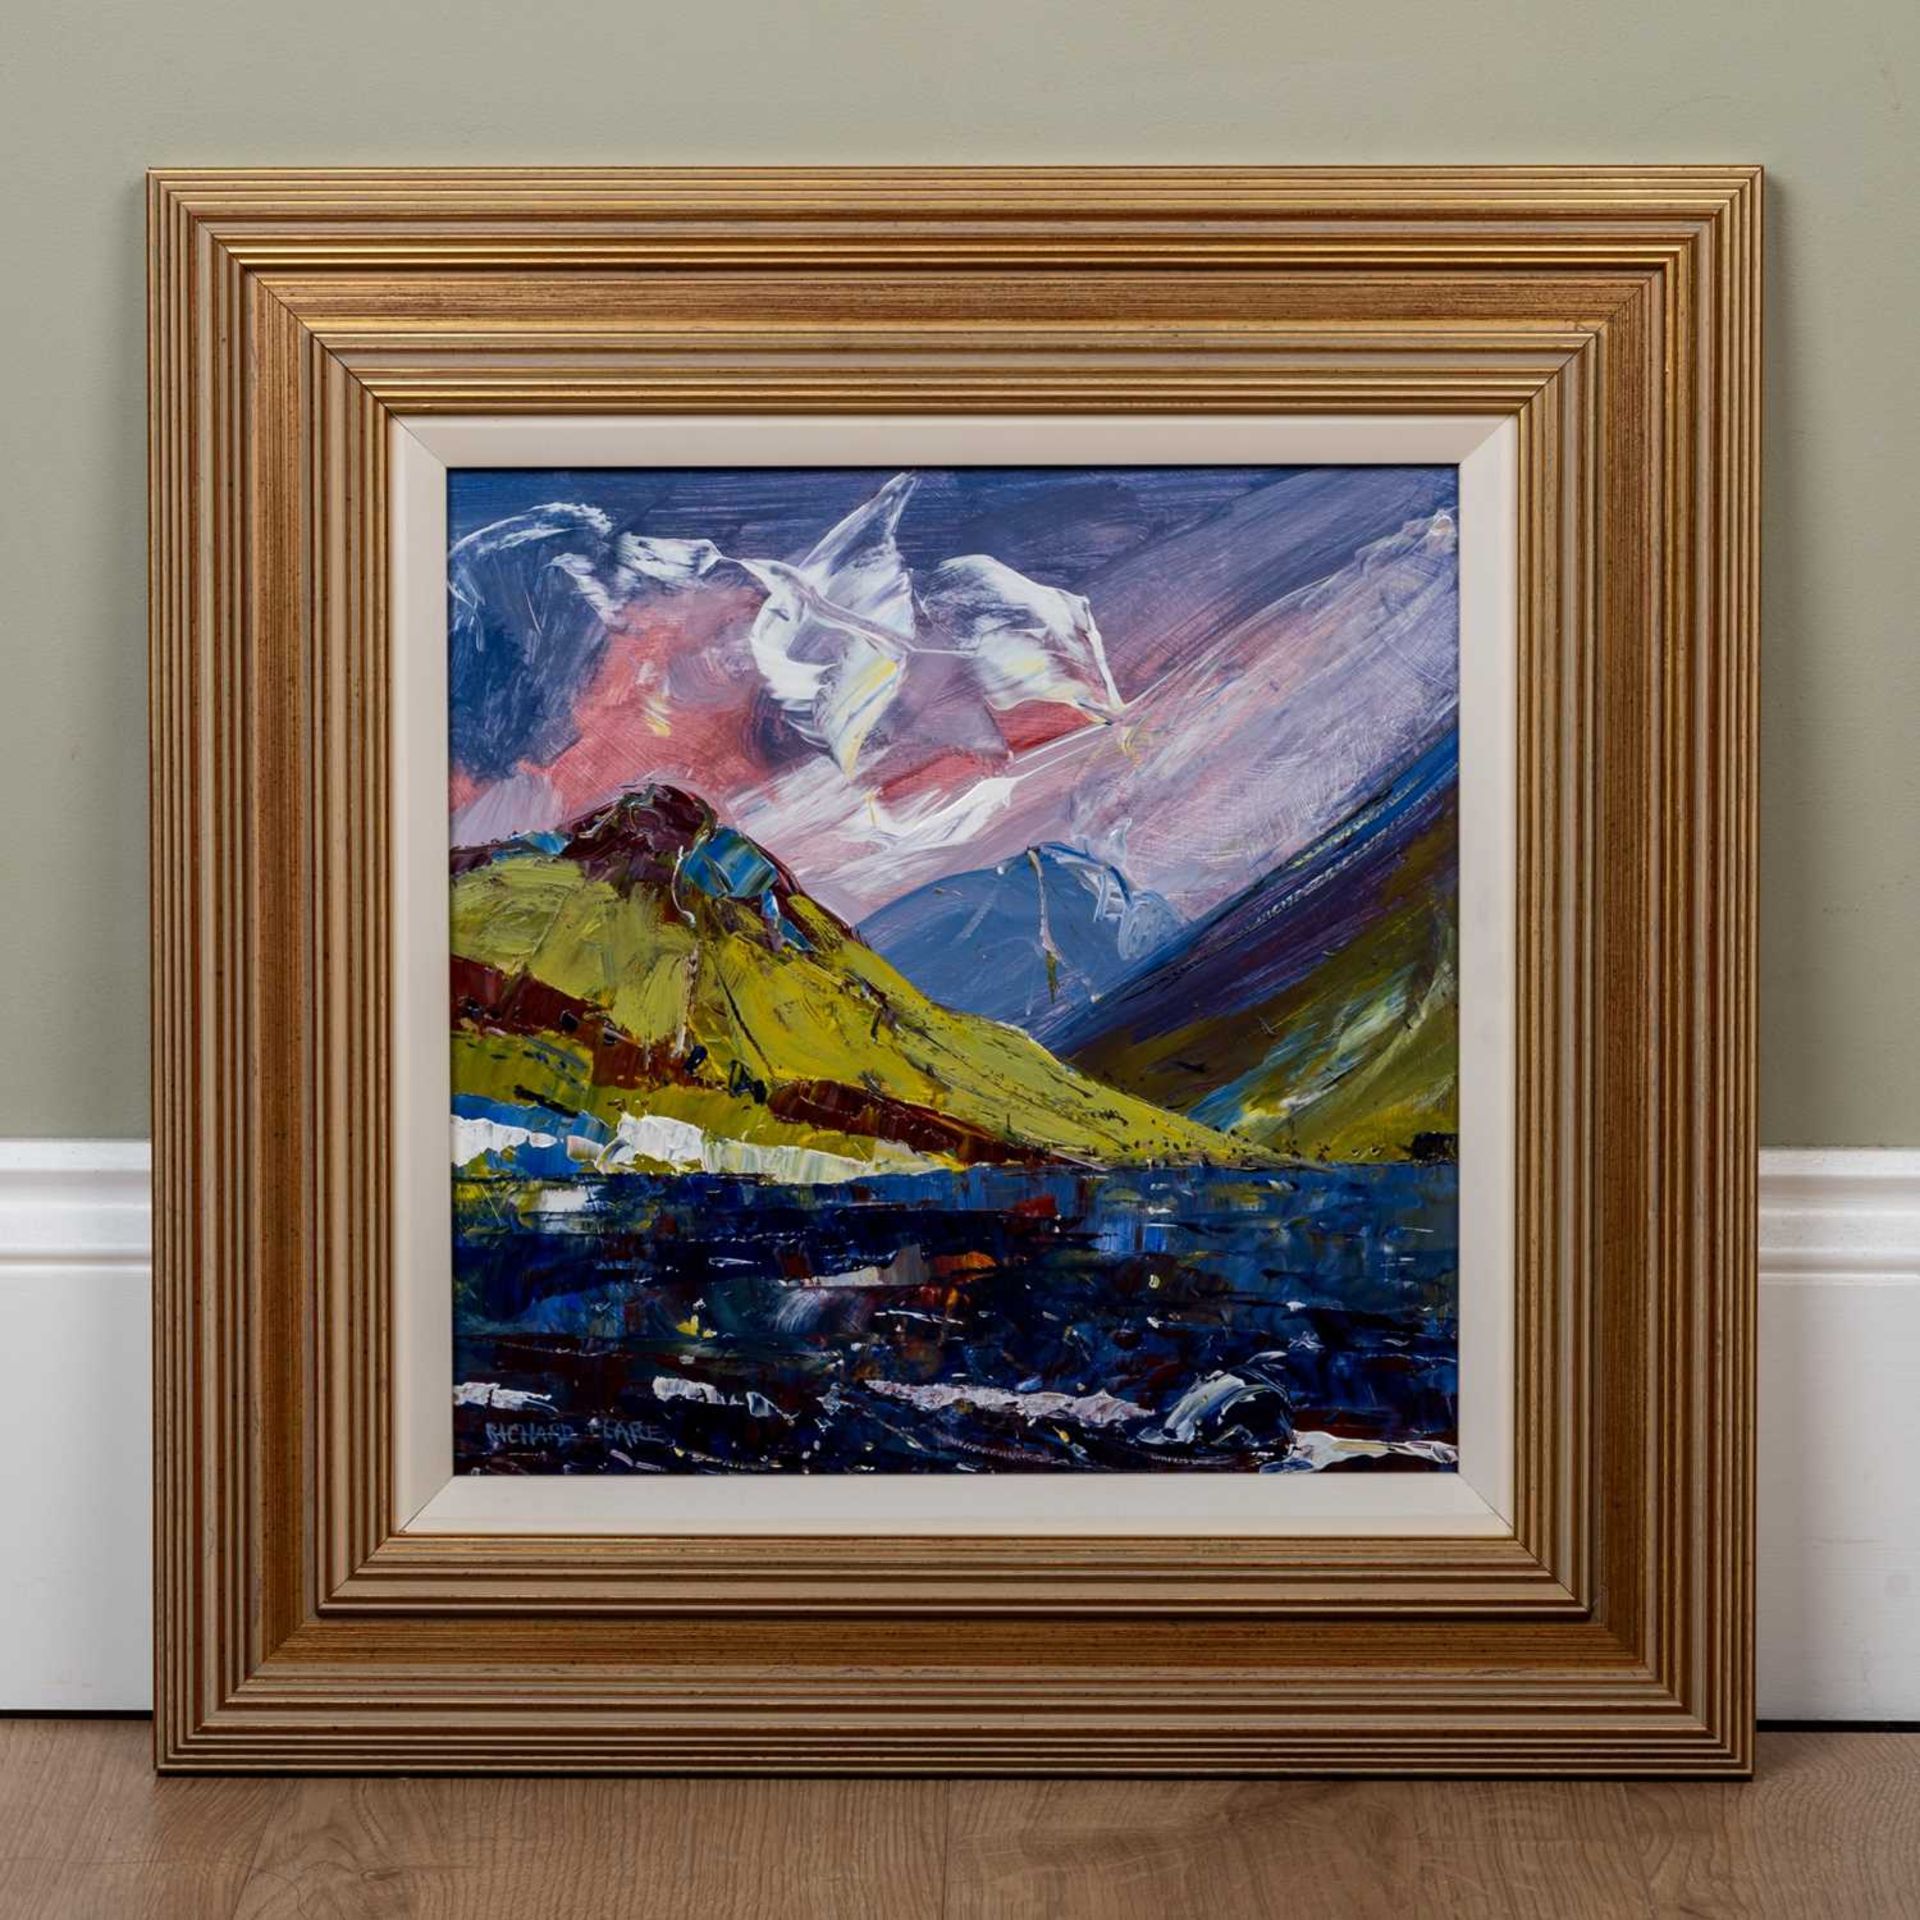 Richard Clare (b. 1964) 'Foreboding of Wastwater', acrylic on board, signed lower left, 29cm x 28.